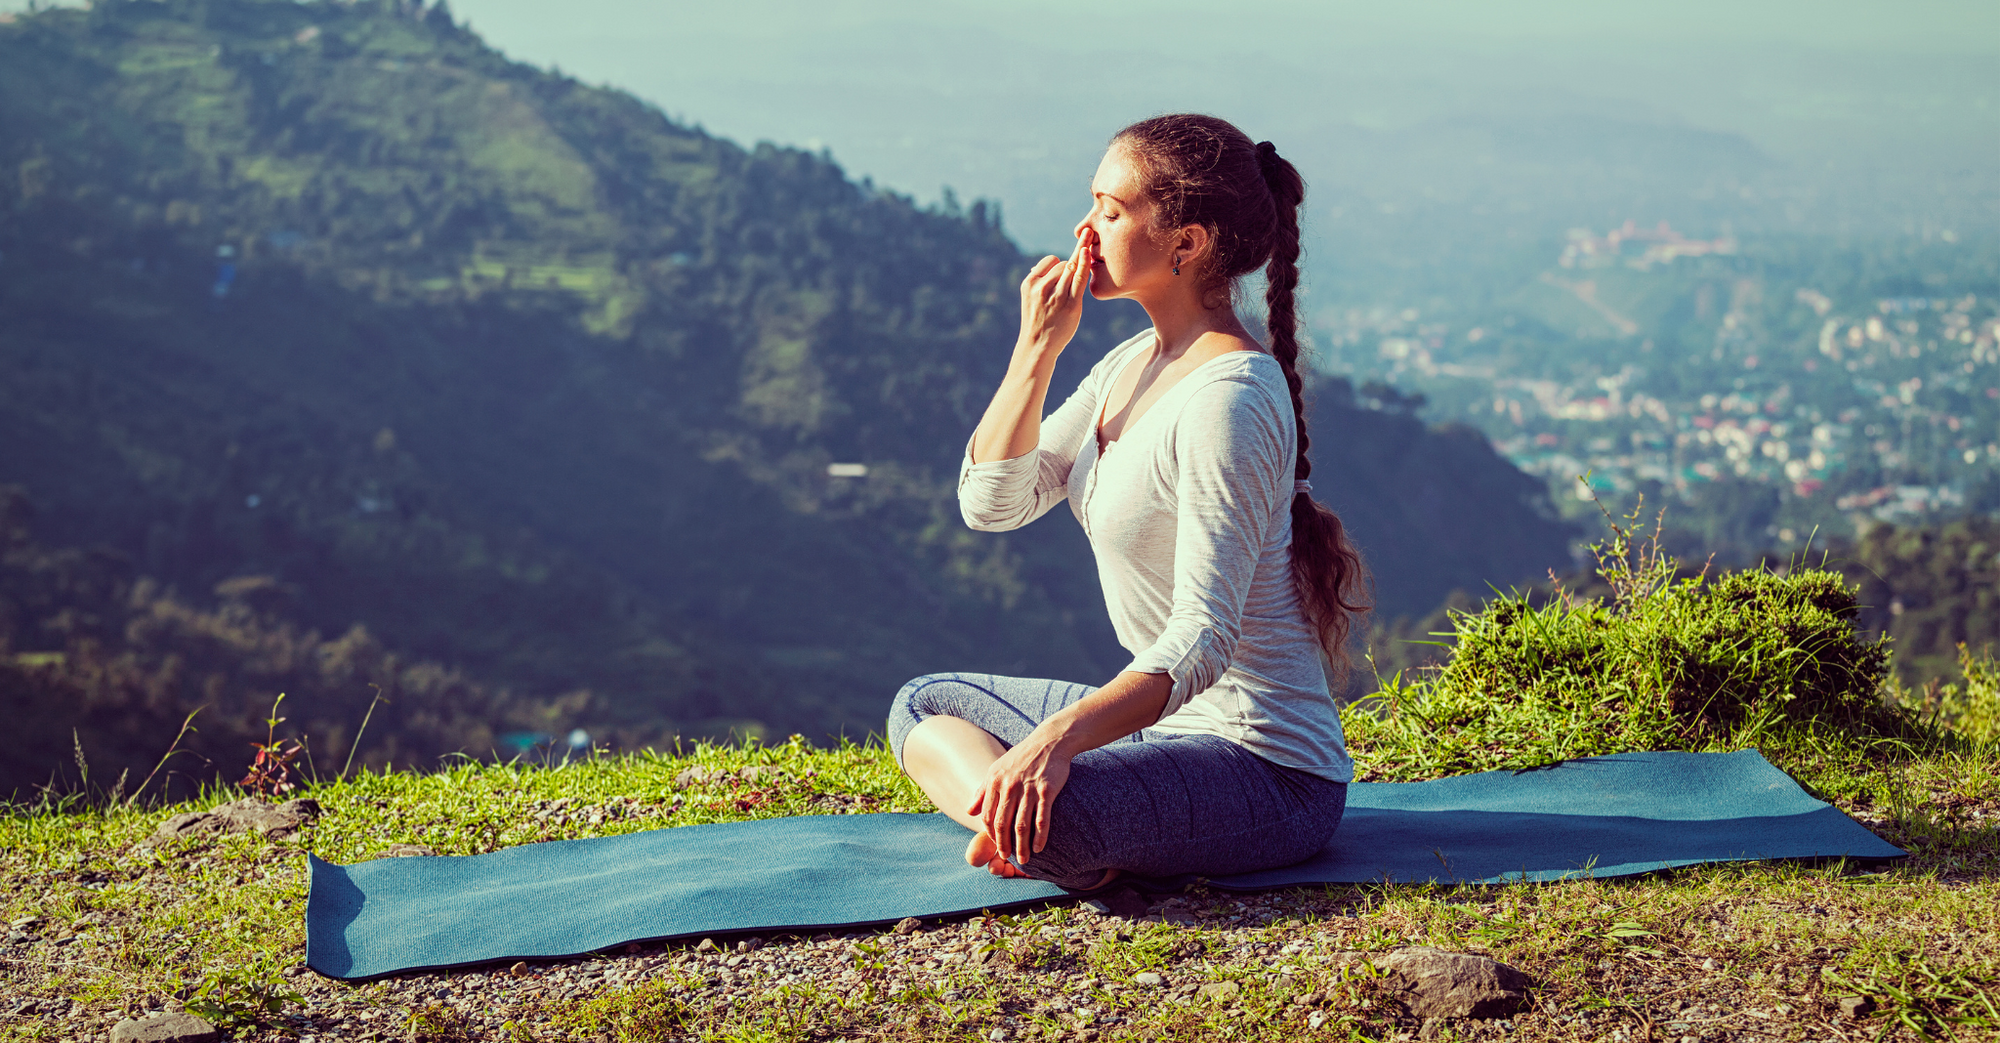 A Beginners Guide on How To Do Pranayama